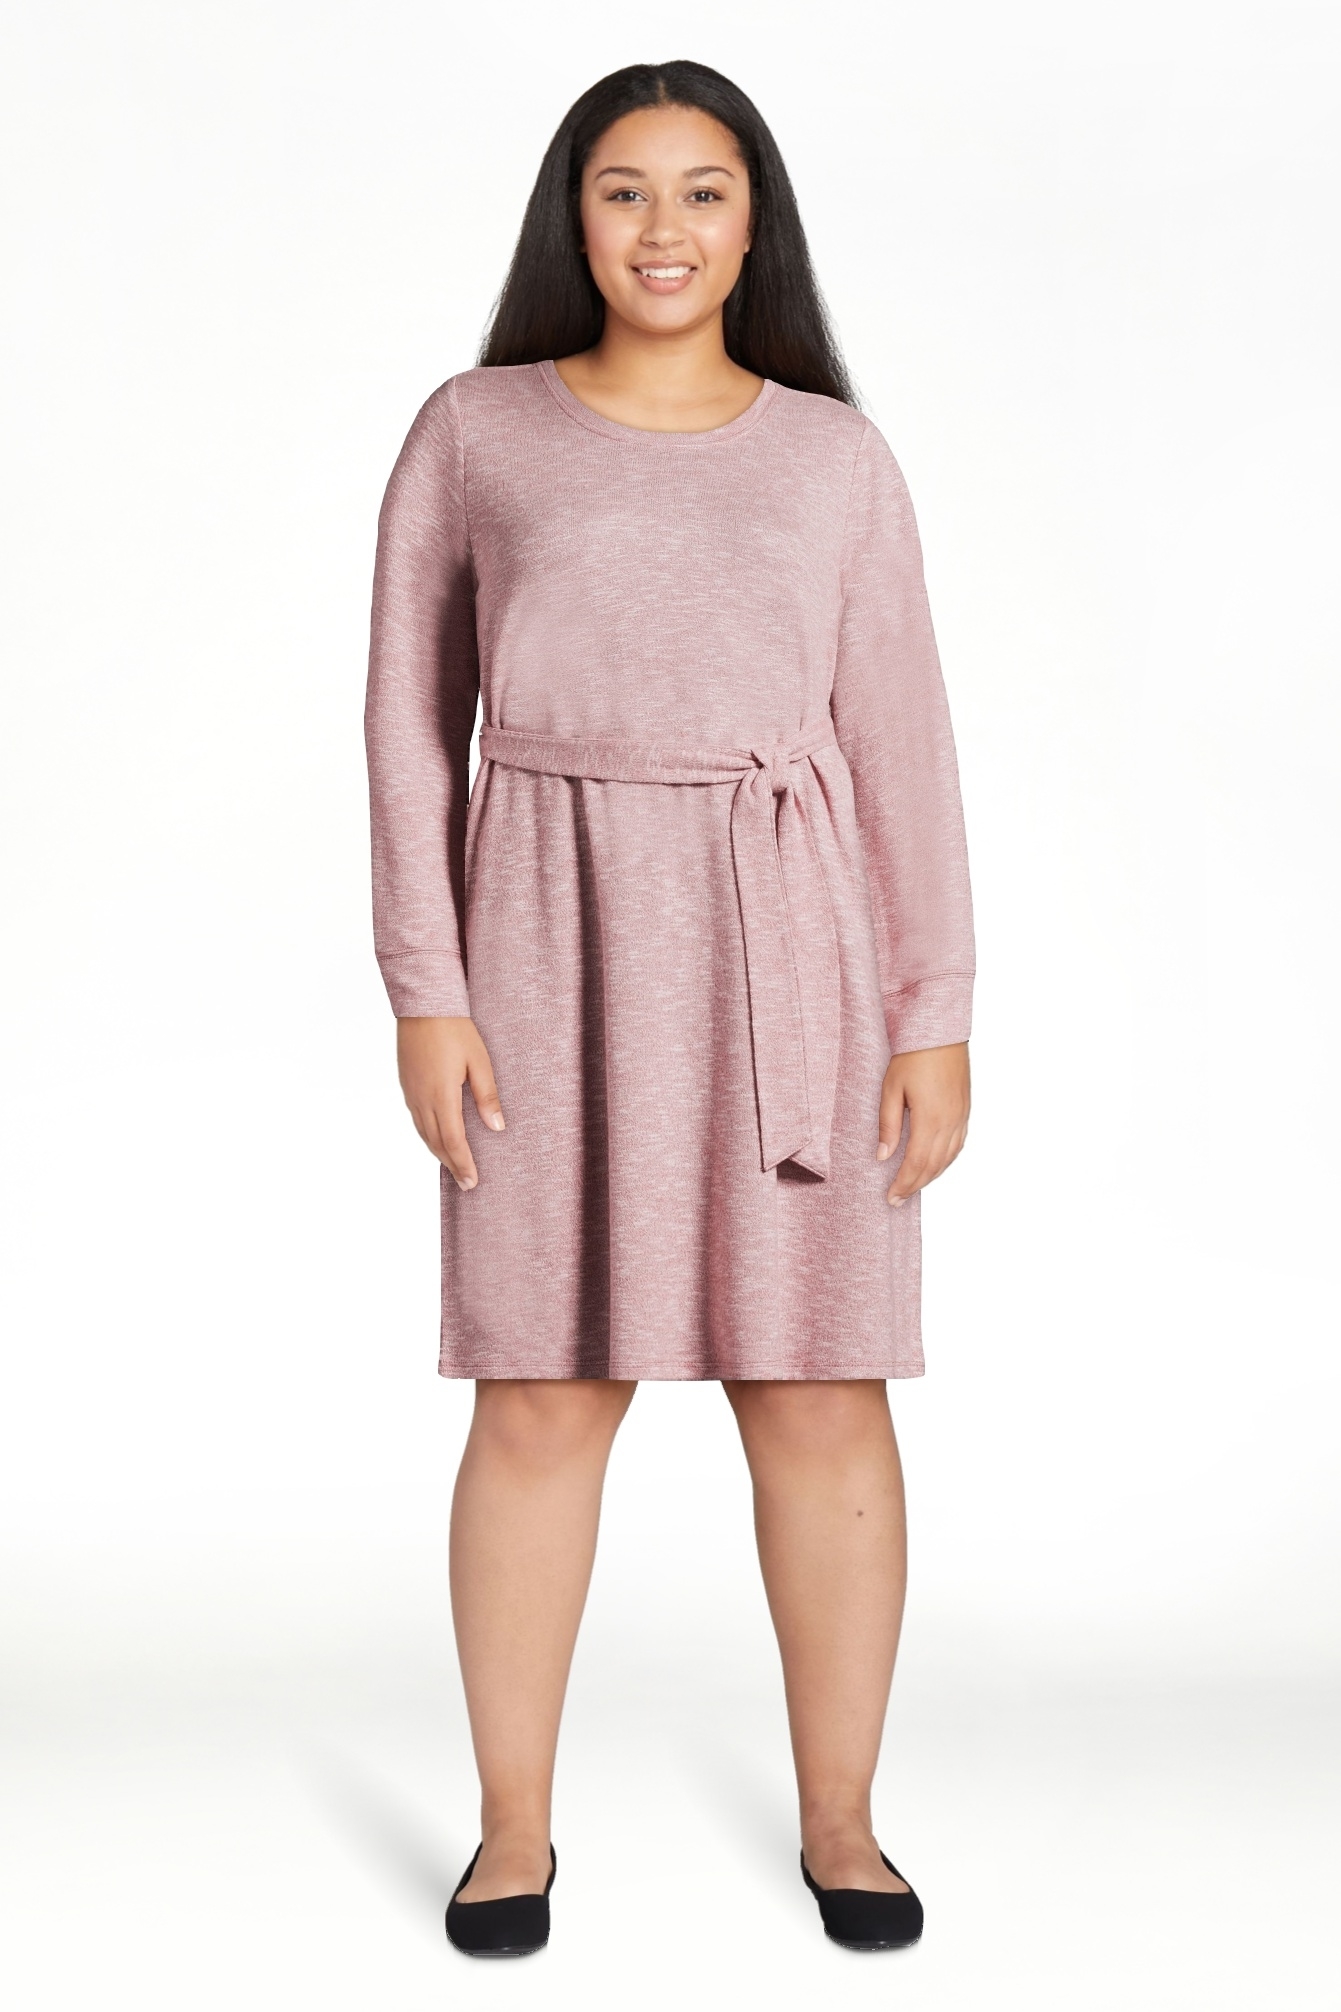 Person standing in a pink dress with a waist tie and long sleeves, suitable for a shopping category